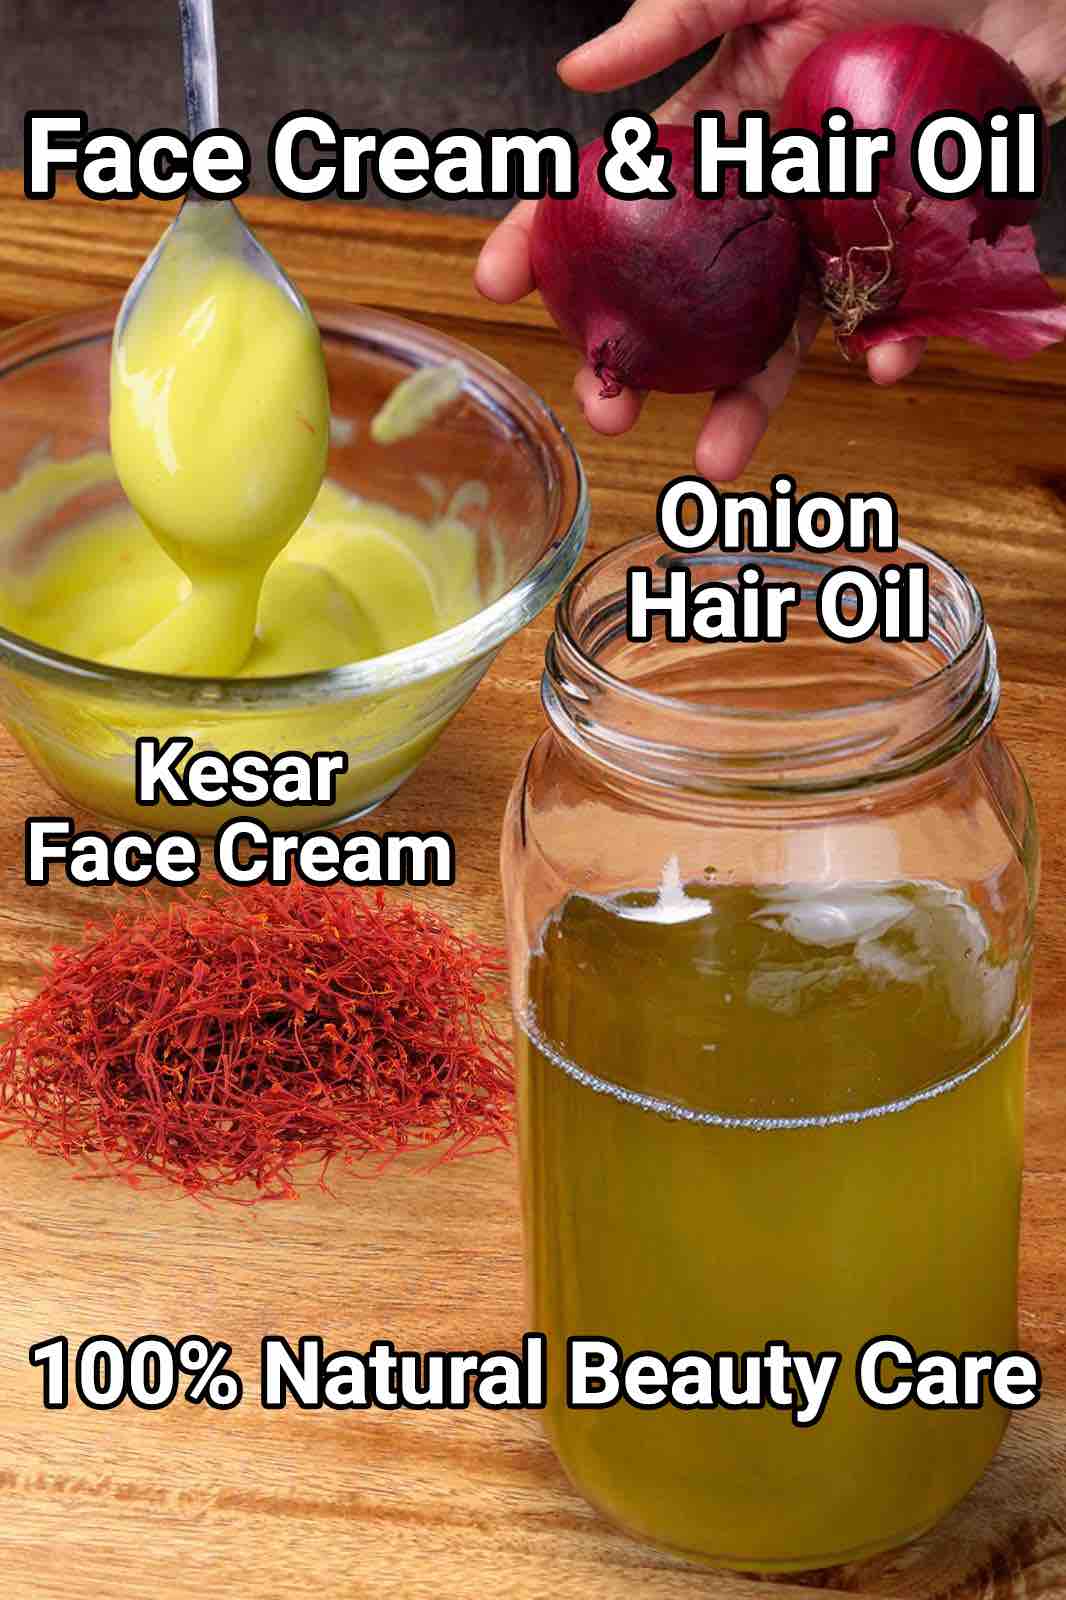 Onion Hair Oil Recipe for easy hair growth | Face Cream for Glowing Skin